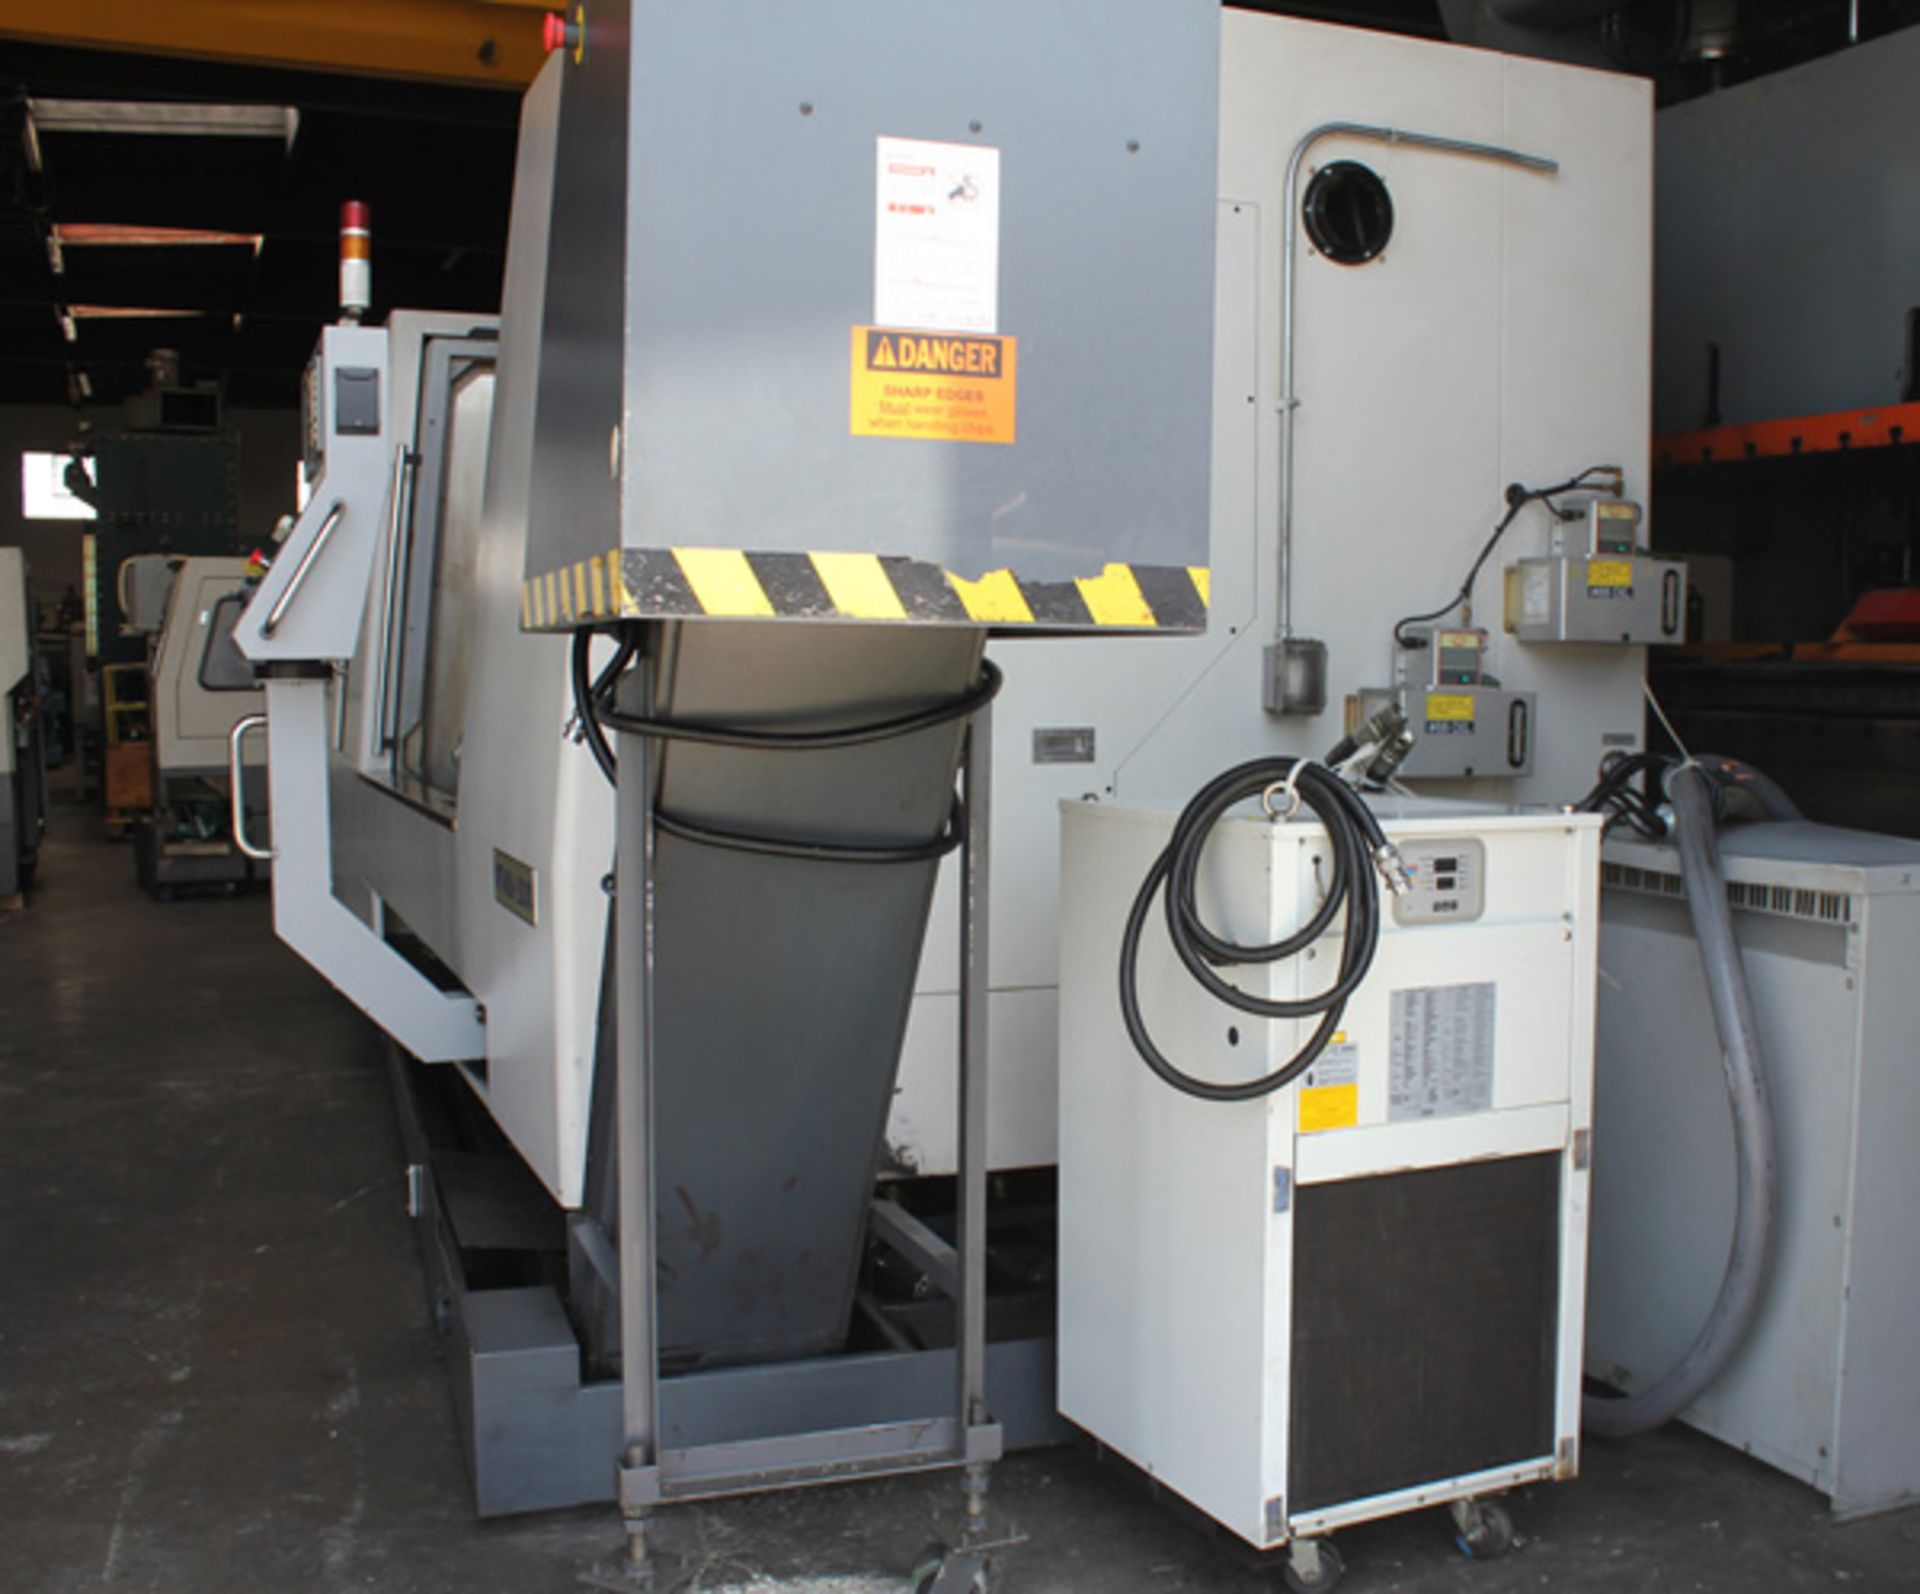 2011 Mighty Viper CNC Turning Center | 34.6" x 78.7", Located In: Huntington Park, CA - 8544HP - Image 25 of 29